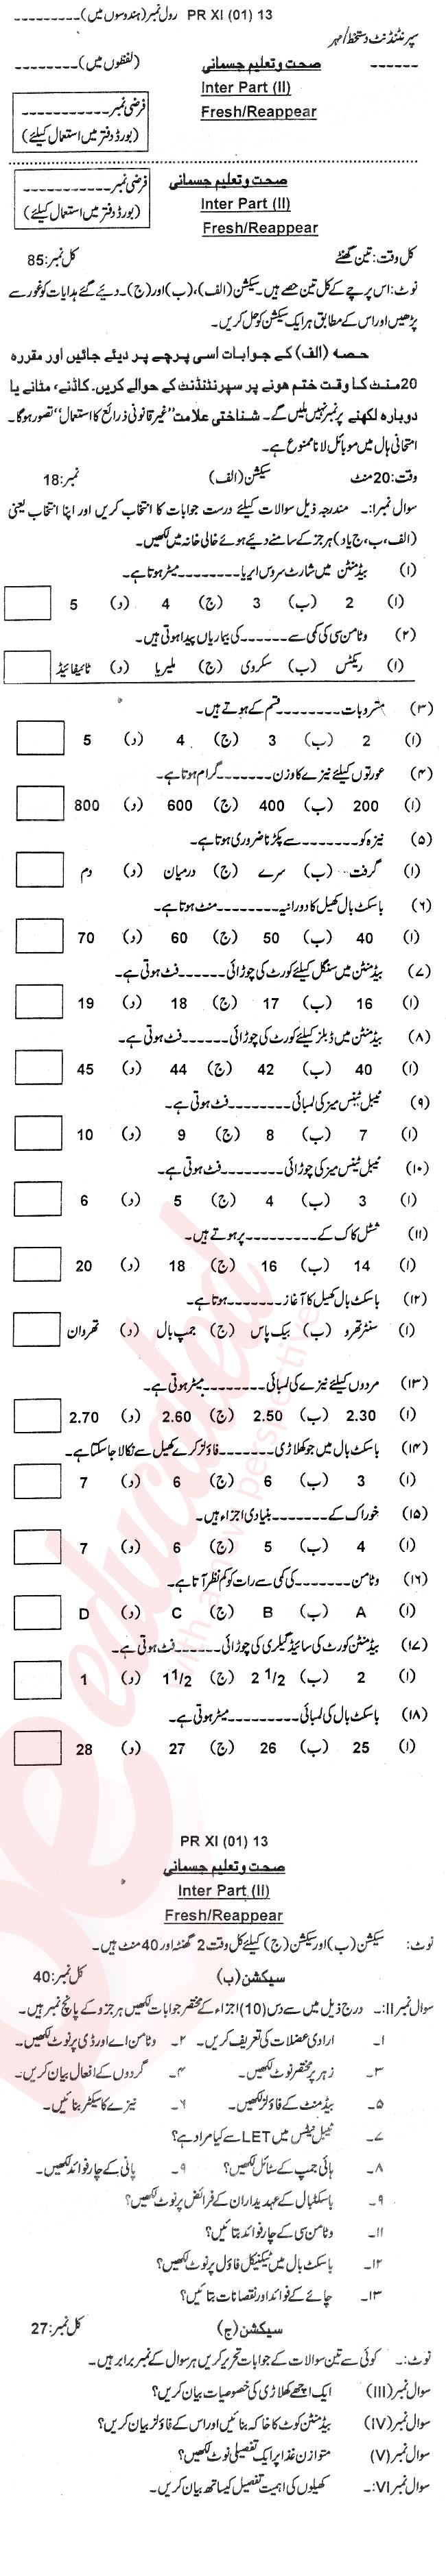 Health and Physical Education FA Part 2 Past Paper Group 1 BISE Bannu 2013